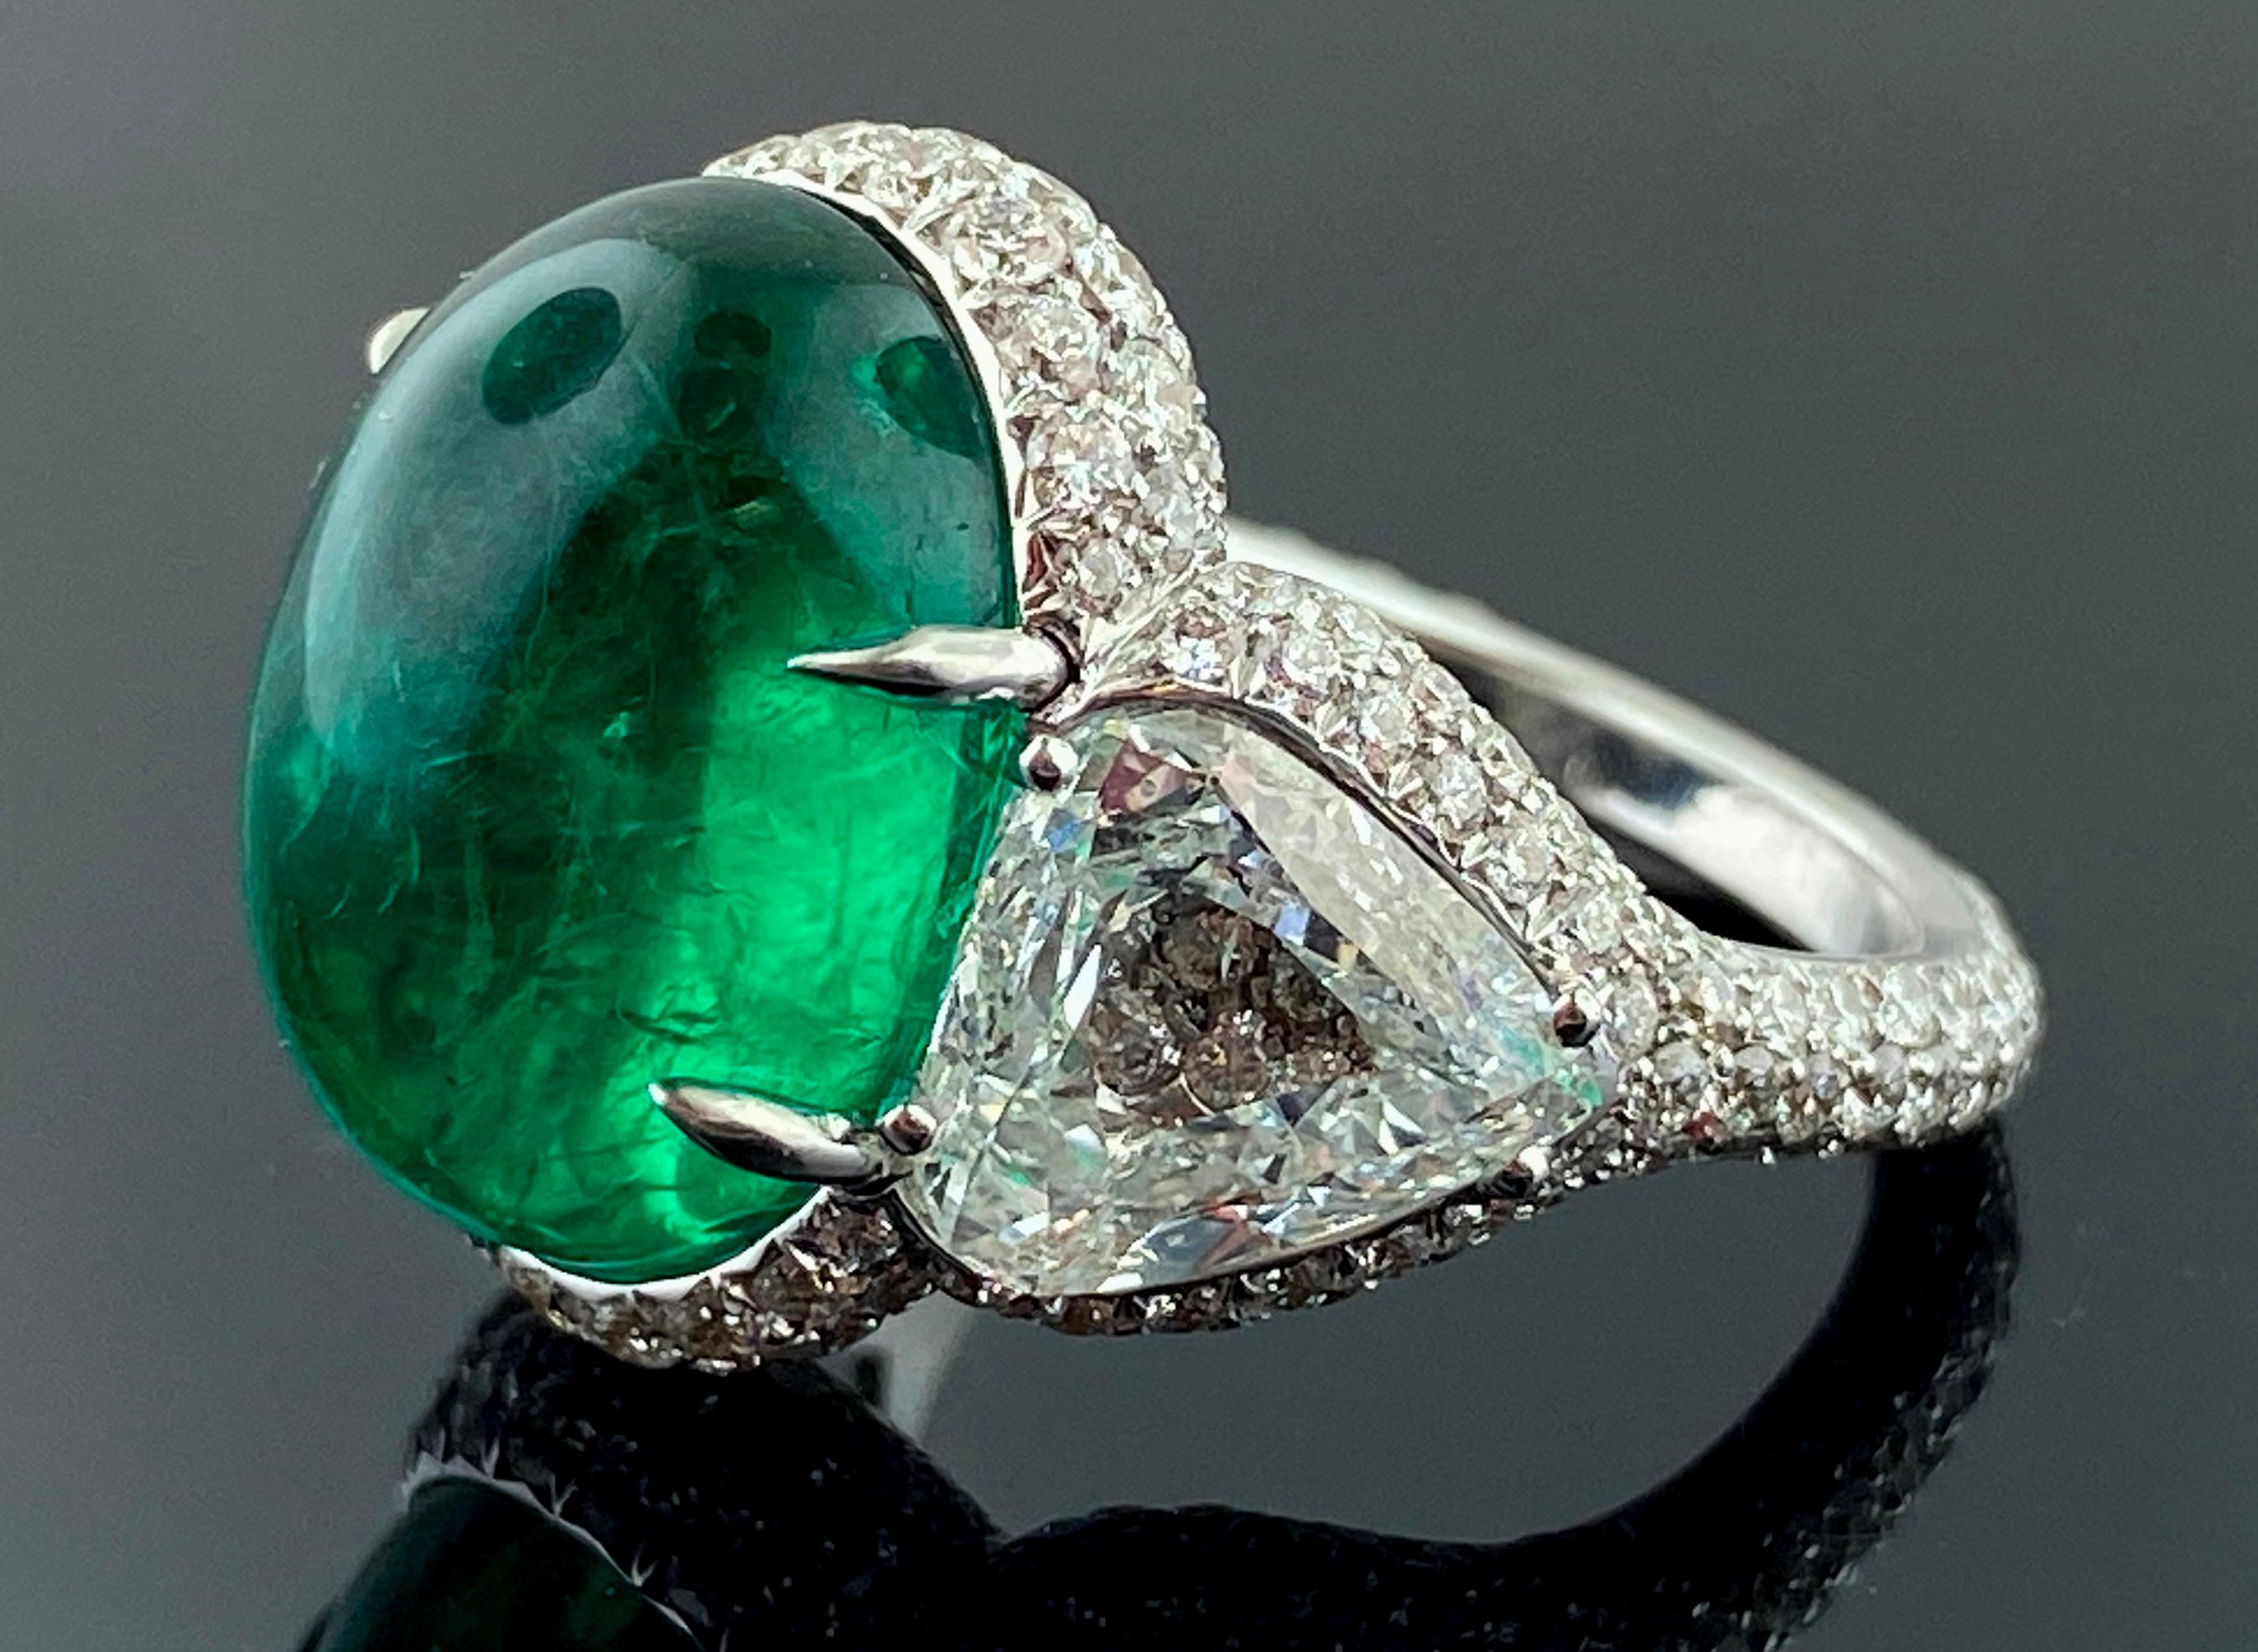 Set in 18 karat white gold is an 11.43 carat Oval Cabochon Emerald with 2 Trillion cut diamonds, weighing 4.02 carats total, plus 249 round brilliant cut diamonds with a total weight of 2.68 carats.  Total diamond weight is 6.70 carats.  Ring size